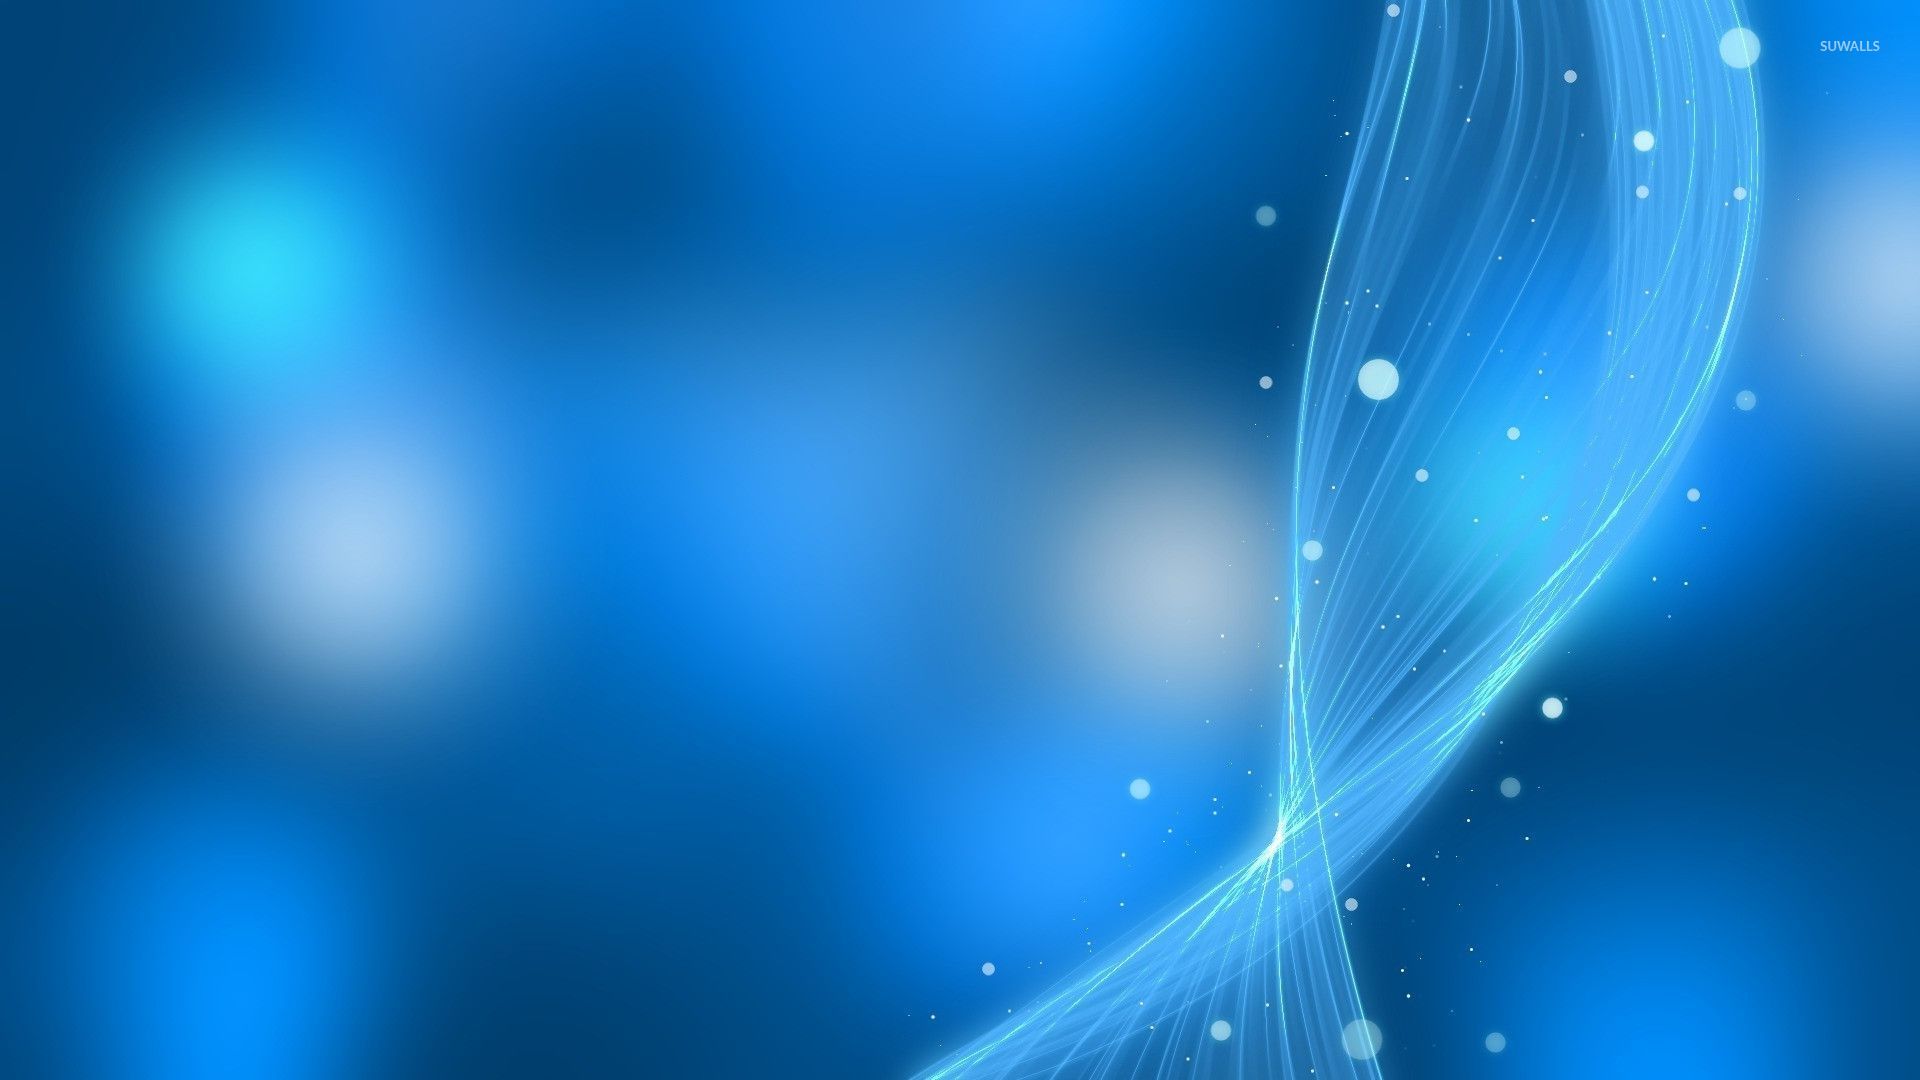 Glowing Blue Curves Wallpaper Abstract Wallpapers 27240